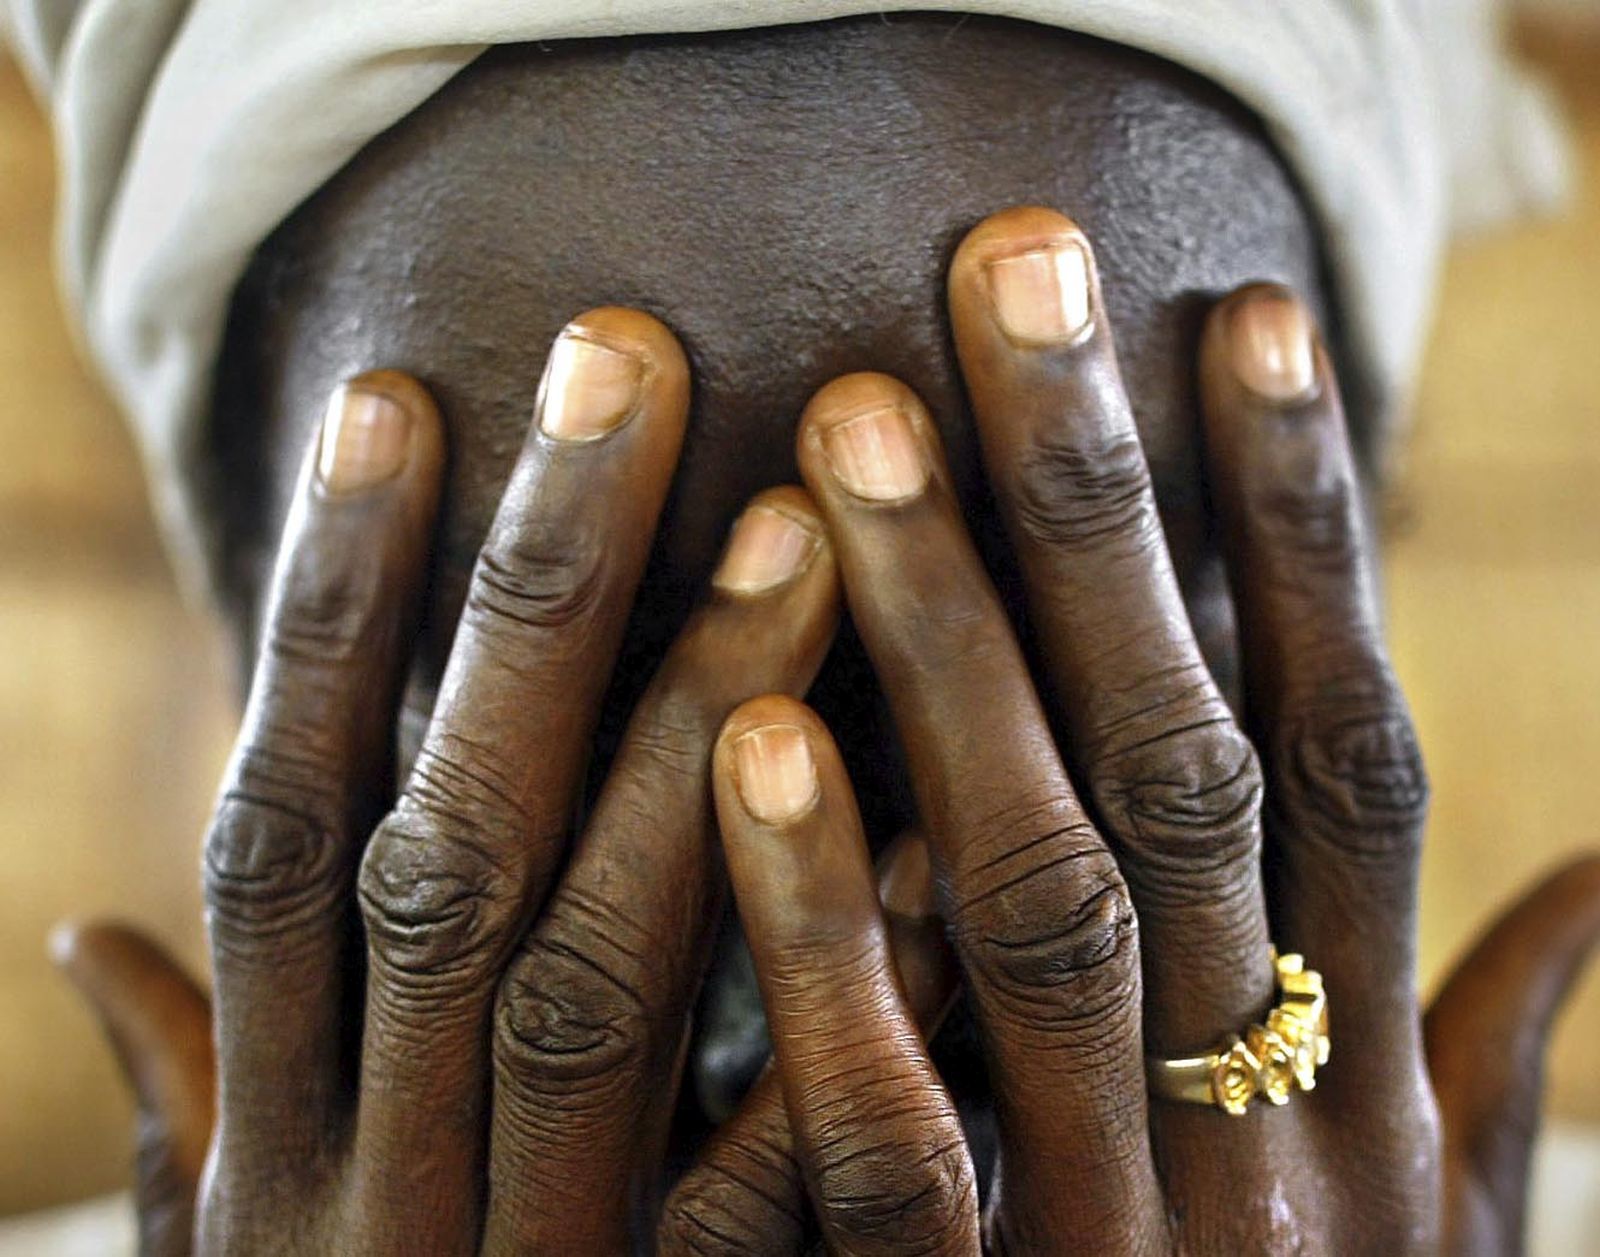 Traumatic events often lead to psychological suffering: rape victim from Liberia.